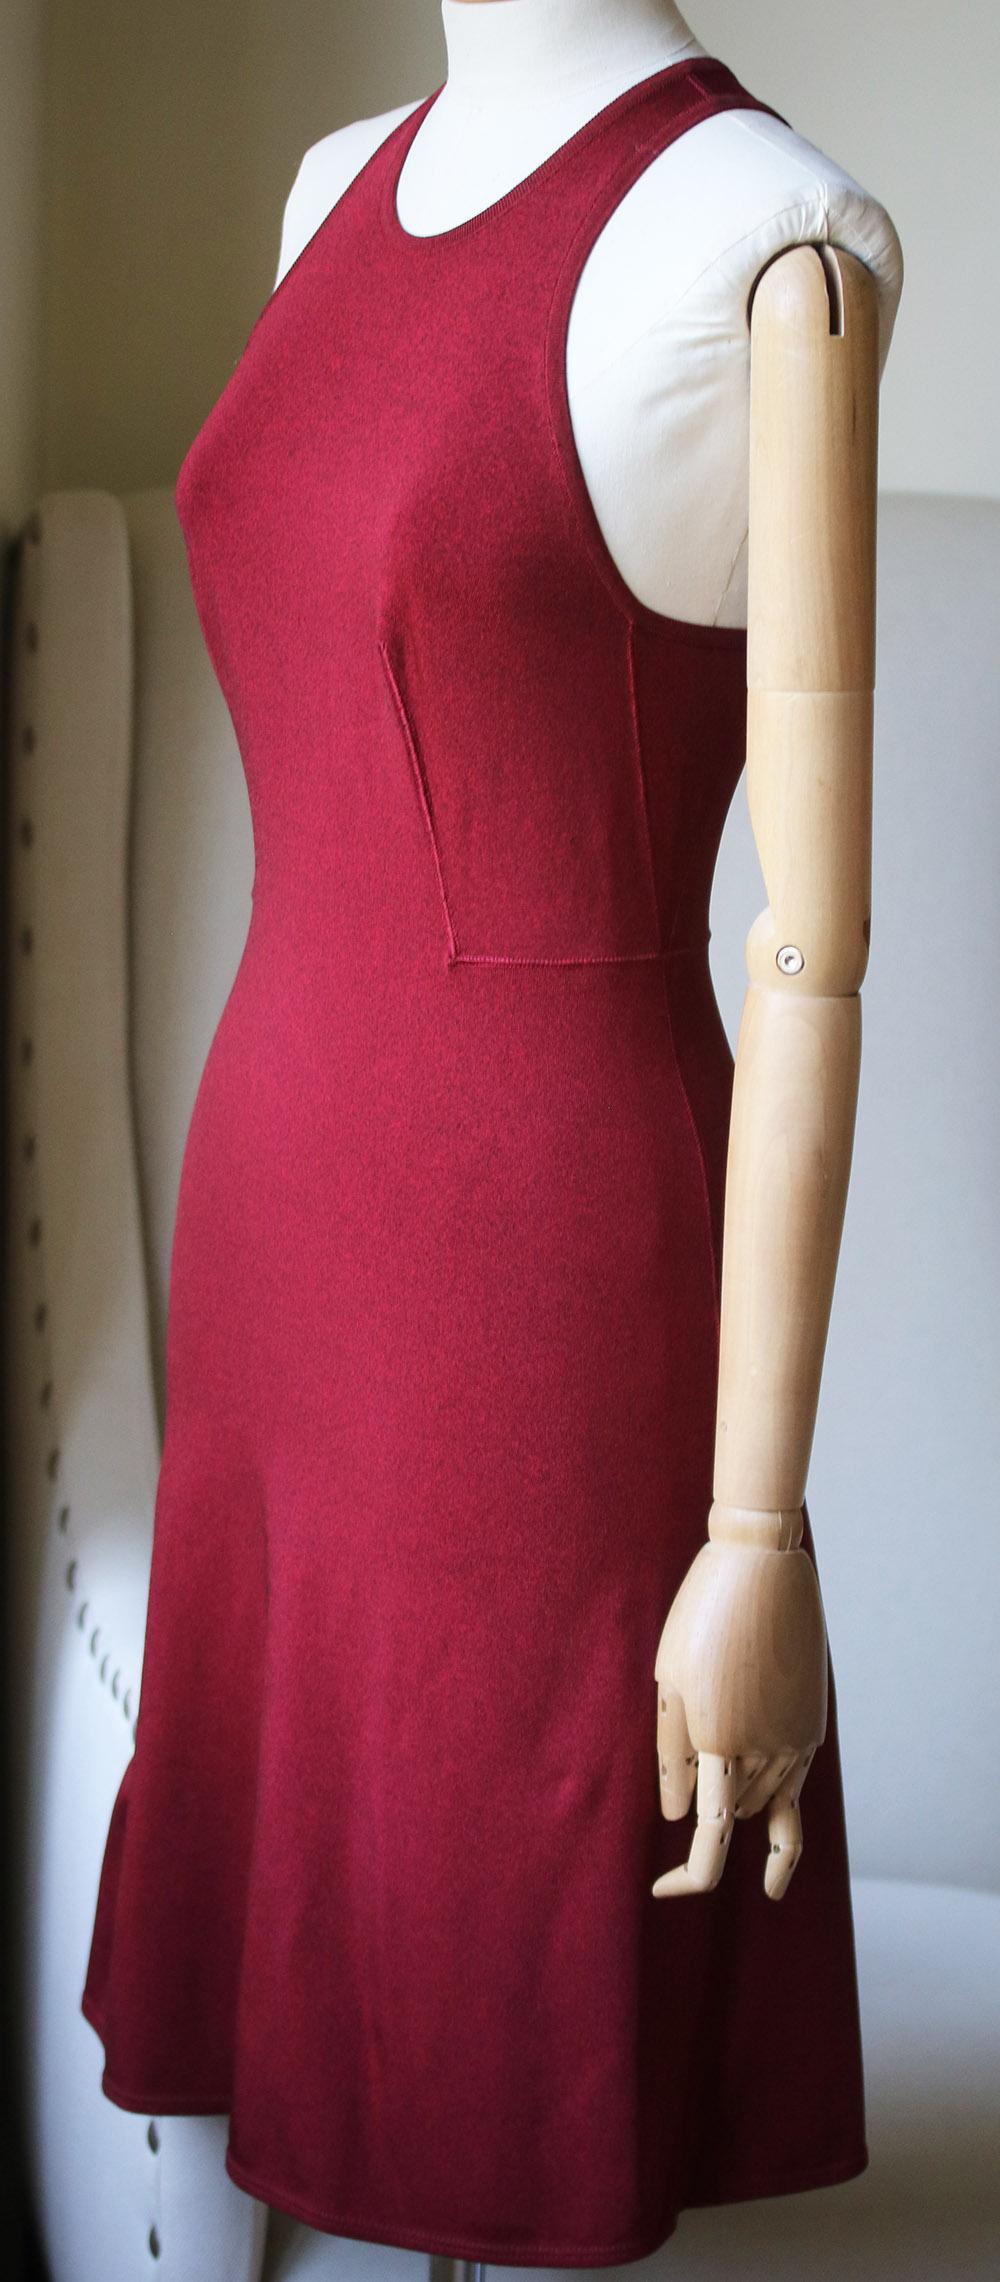 Red fitted high-neck dress from Azzedine Alaïa. Defined waistline. Halterneck dress. Concealed zip down back. Sleeveless. Thick straps. Flared skirt. Unlined. Colour: red. 60% Viscose, 36% polymide, 4% elastane.

Size: XSmall (UK 6, US 2, FR 34, IT